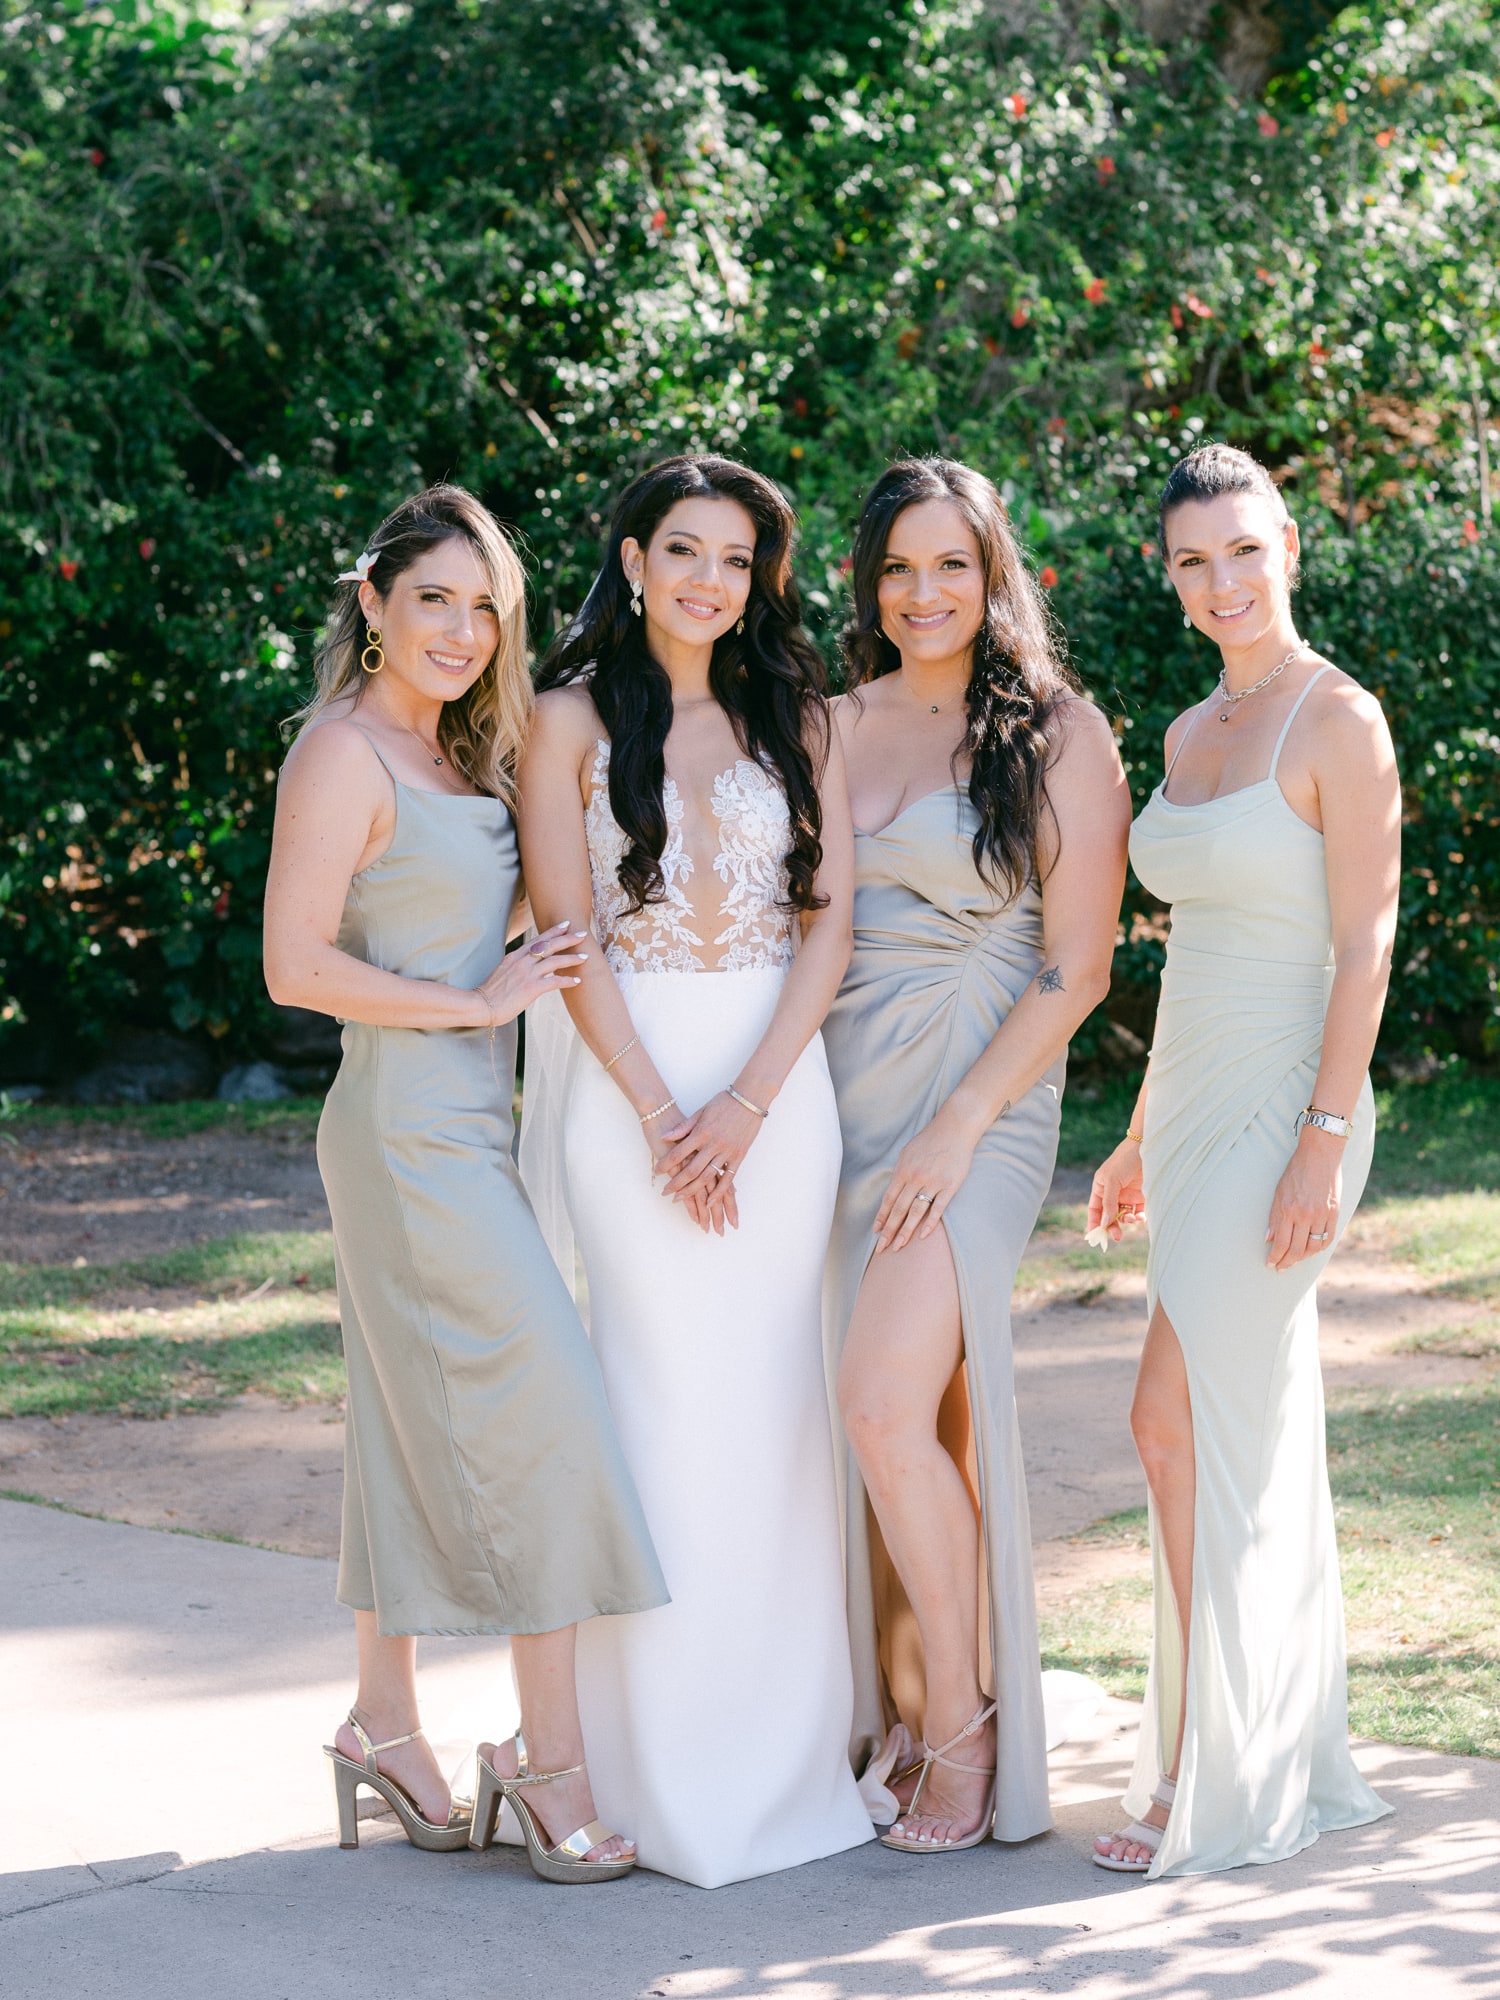 The bridesmaids before the ceremony